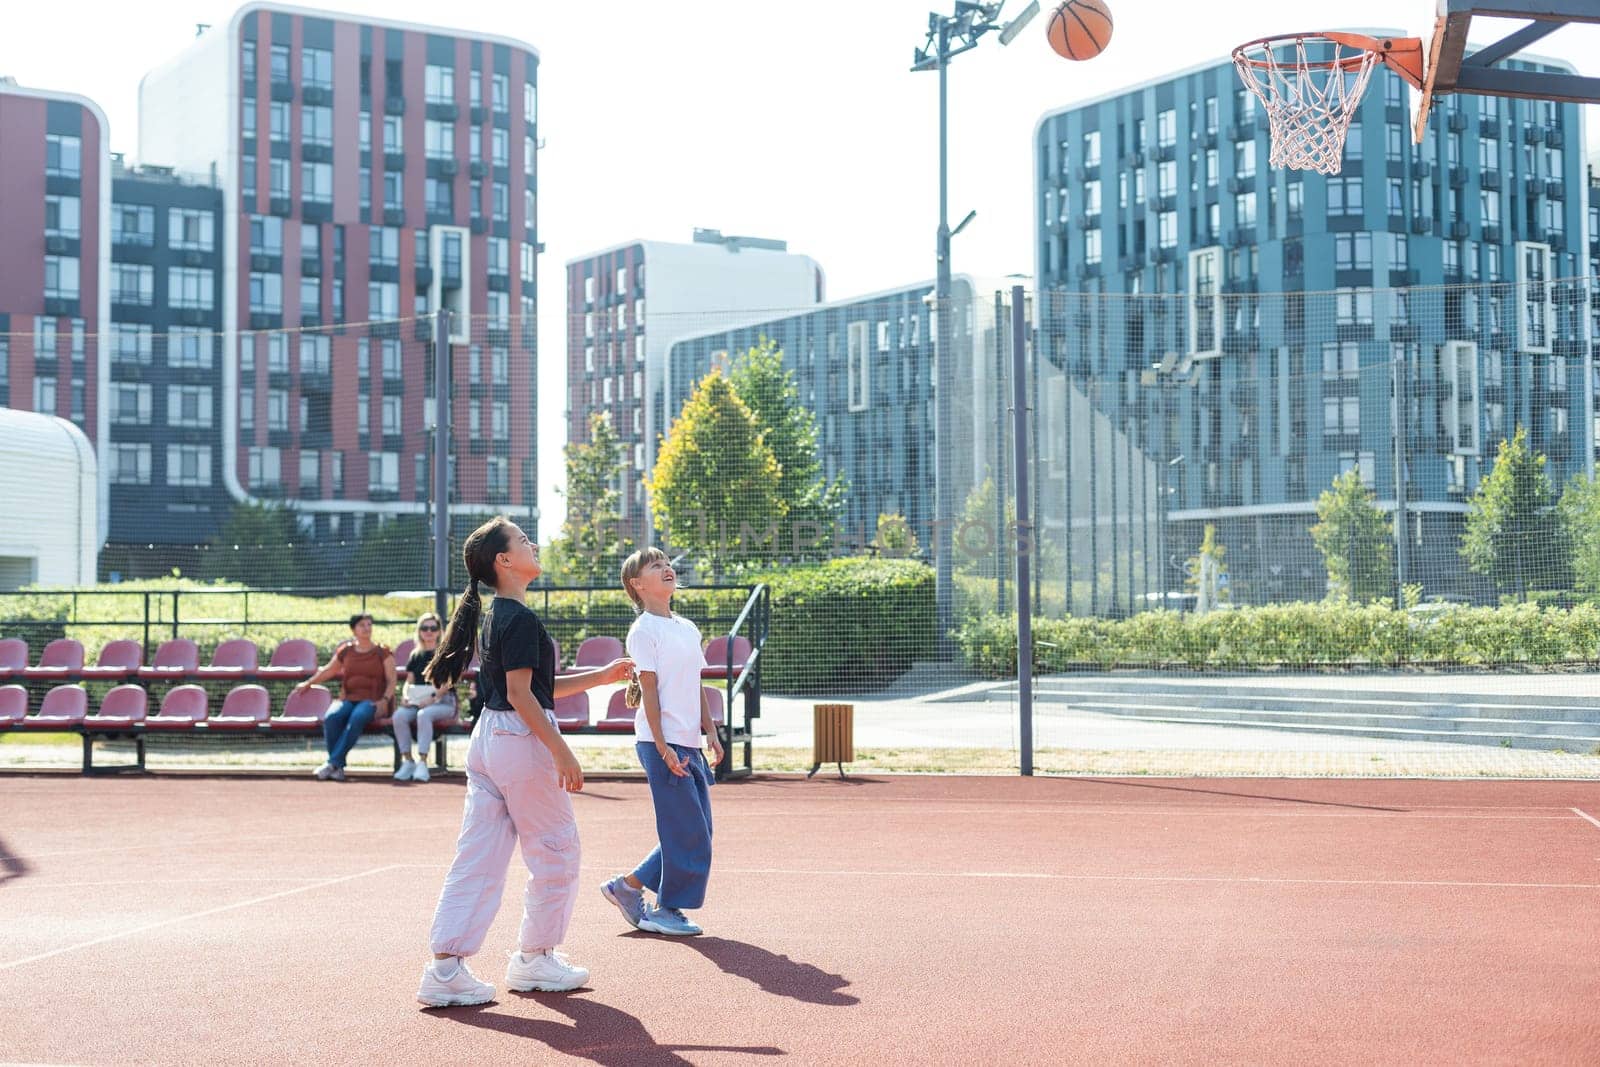 girls playing basketball on the basketball court by Andelov13